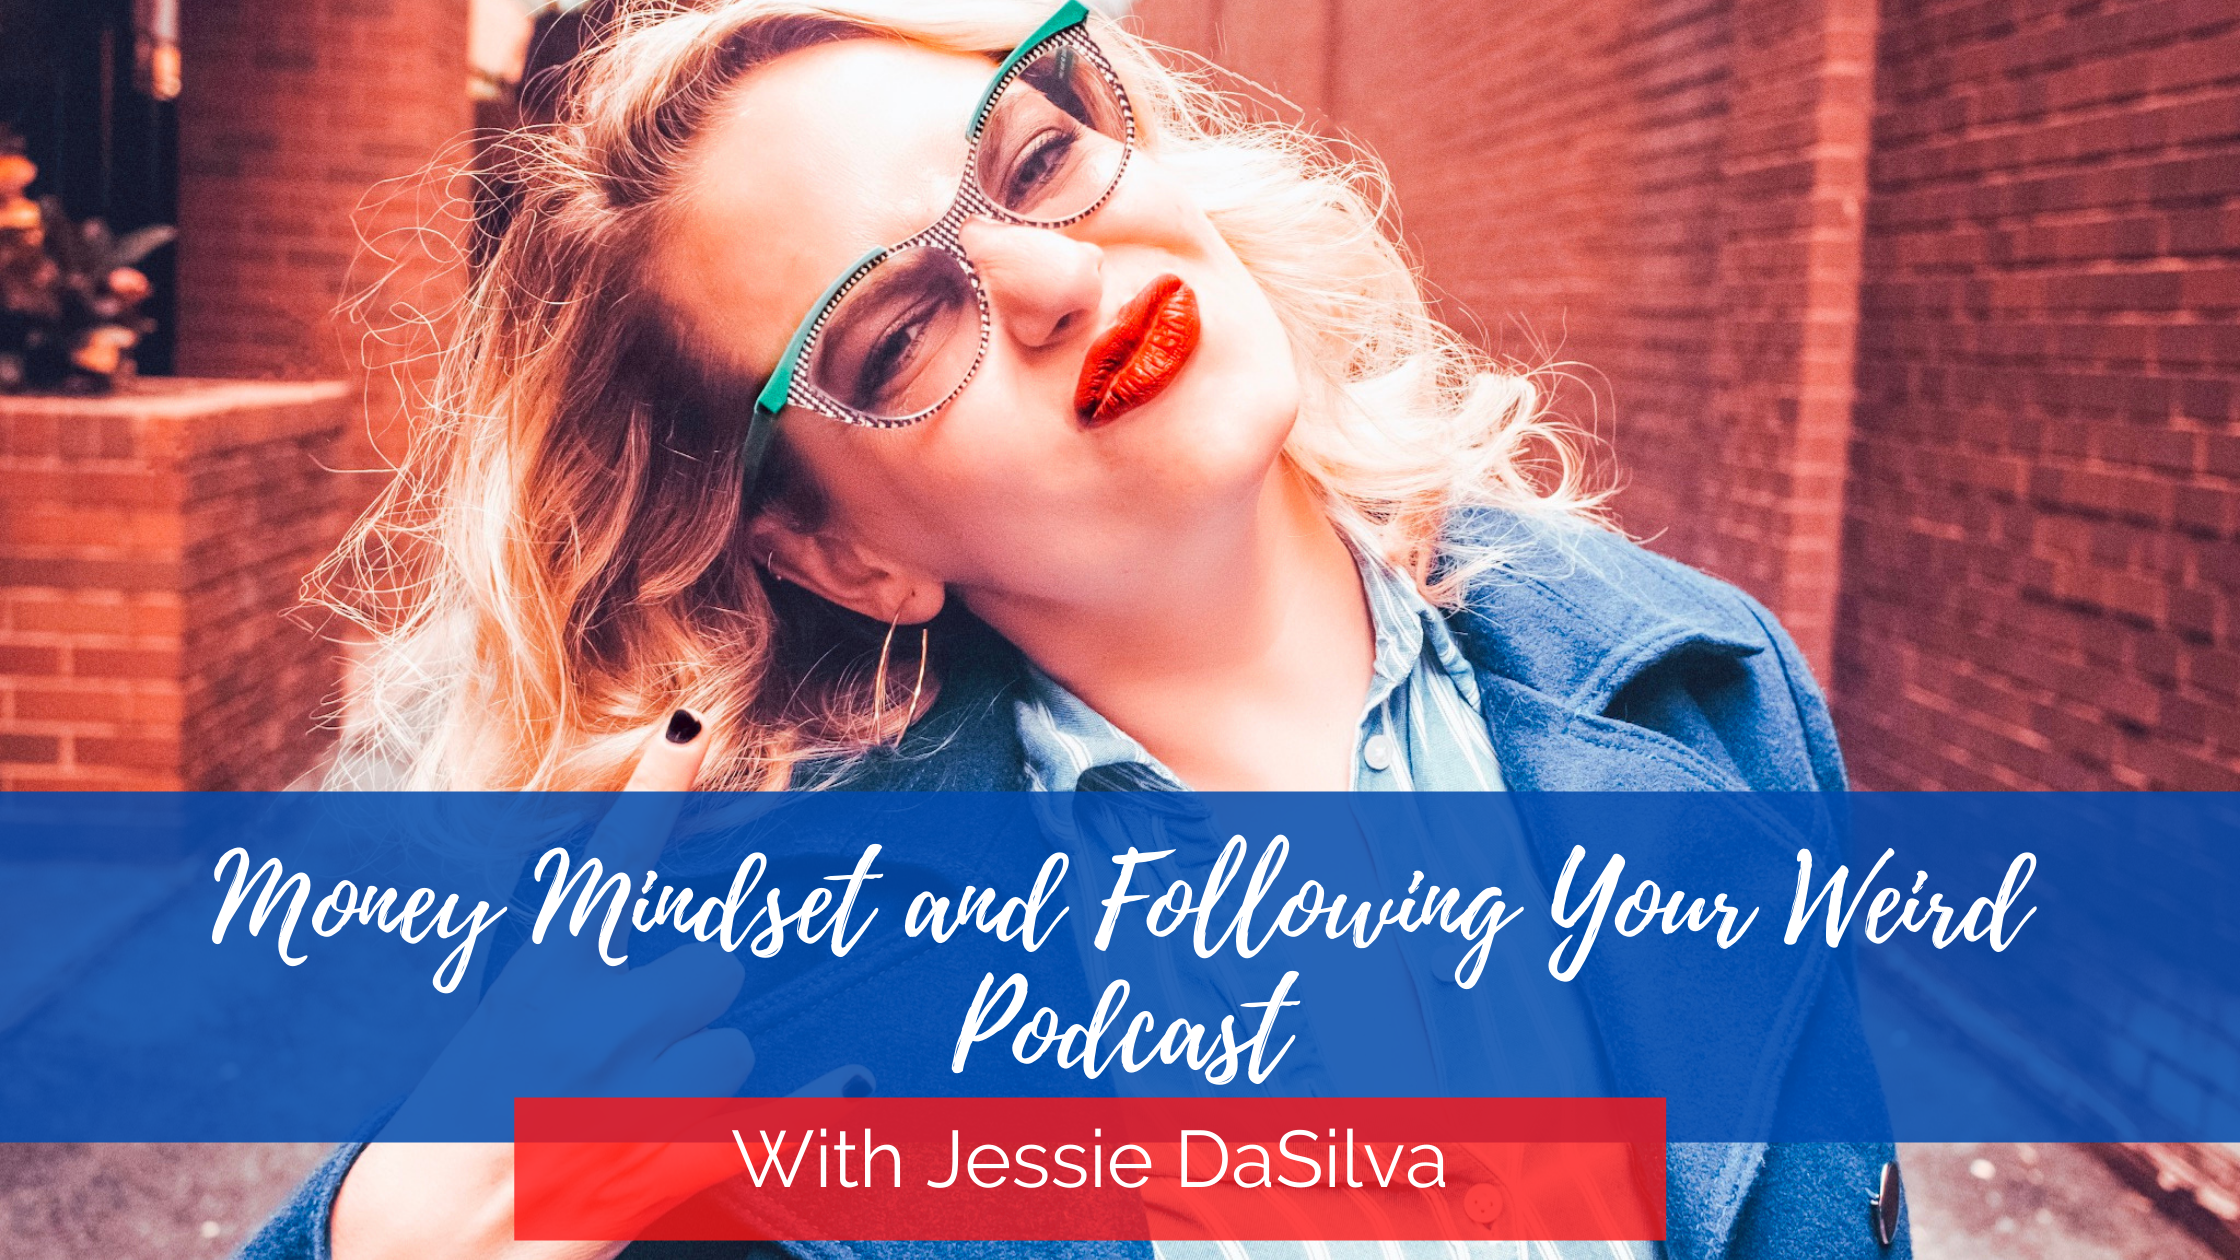 Picture of Jessie DaSilva with the words "Money Mindset and Following Your Weird Podcast with Jessie DaSilva" on top